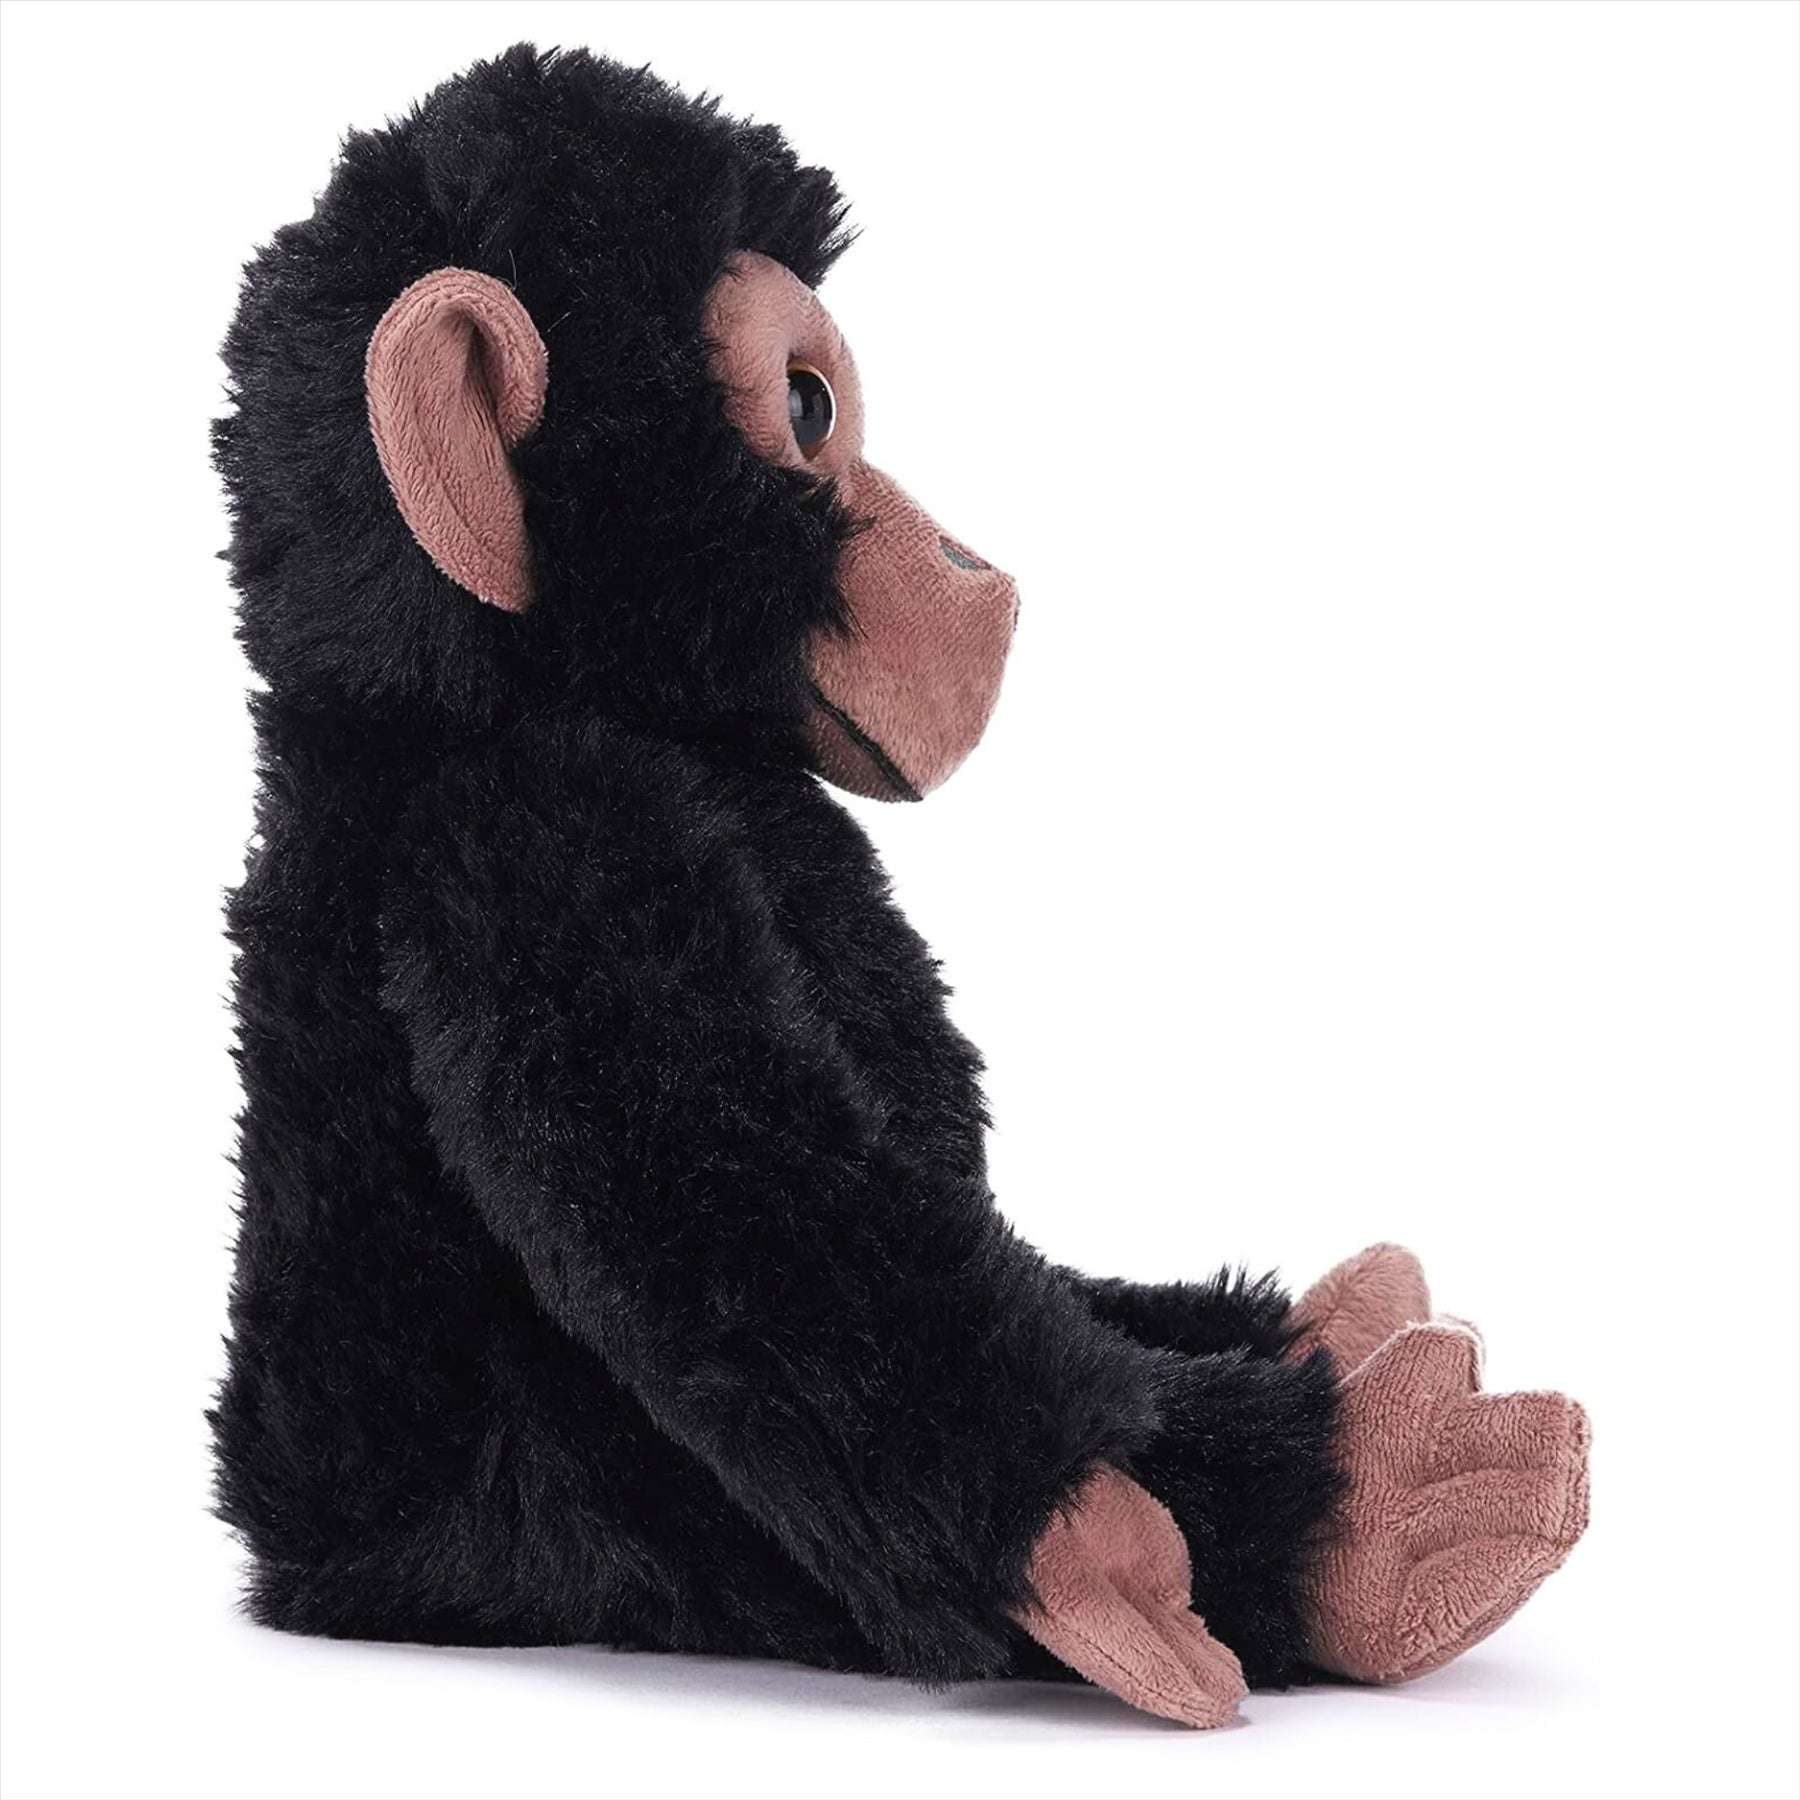 Posh Paws Out of Africa Animals Collection Monkey Super Soft Plush Toy 30cm 12"